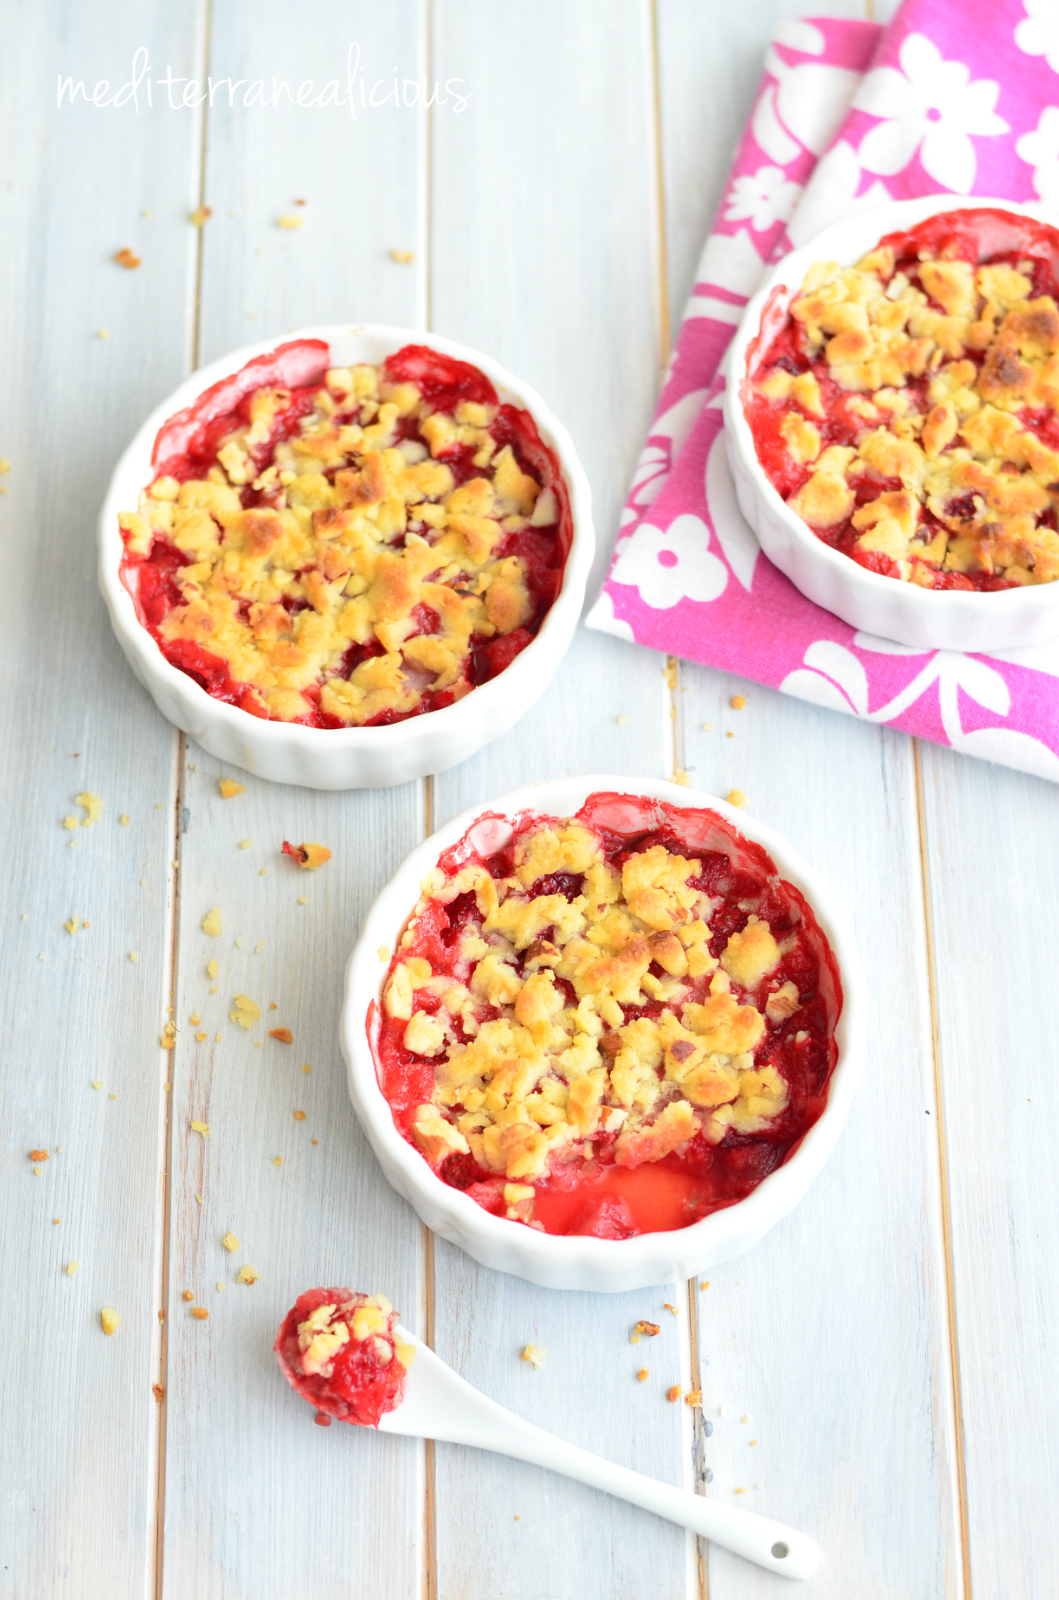 Strawberry Crumble with Almonds